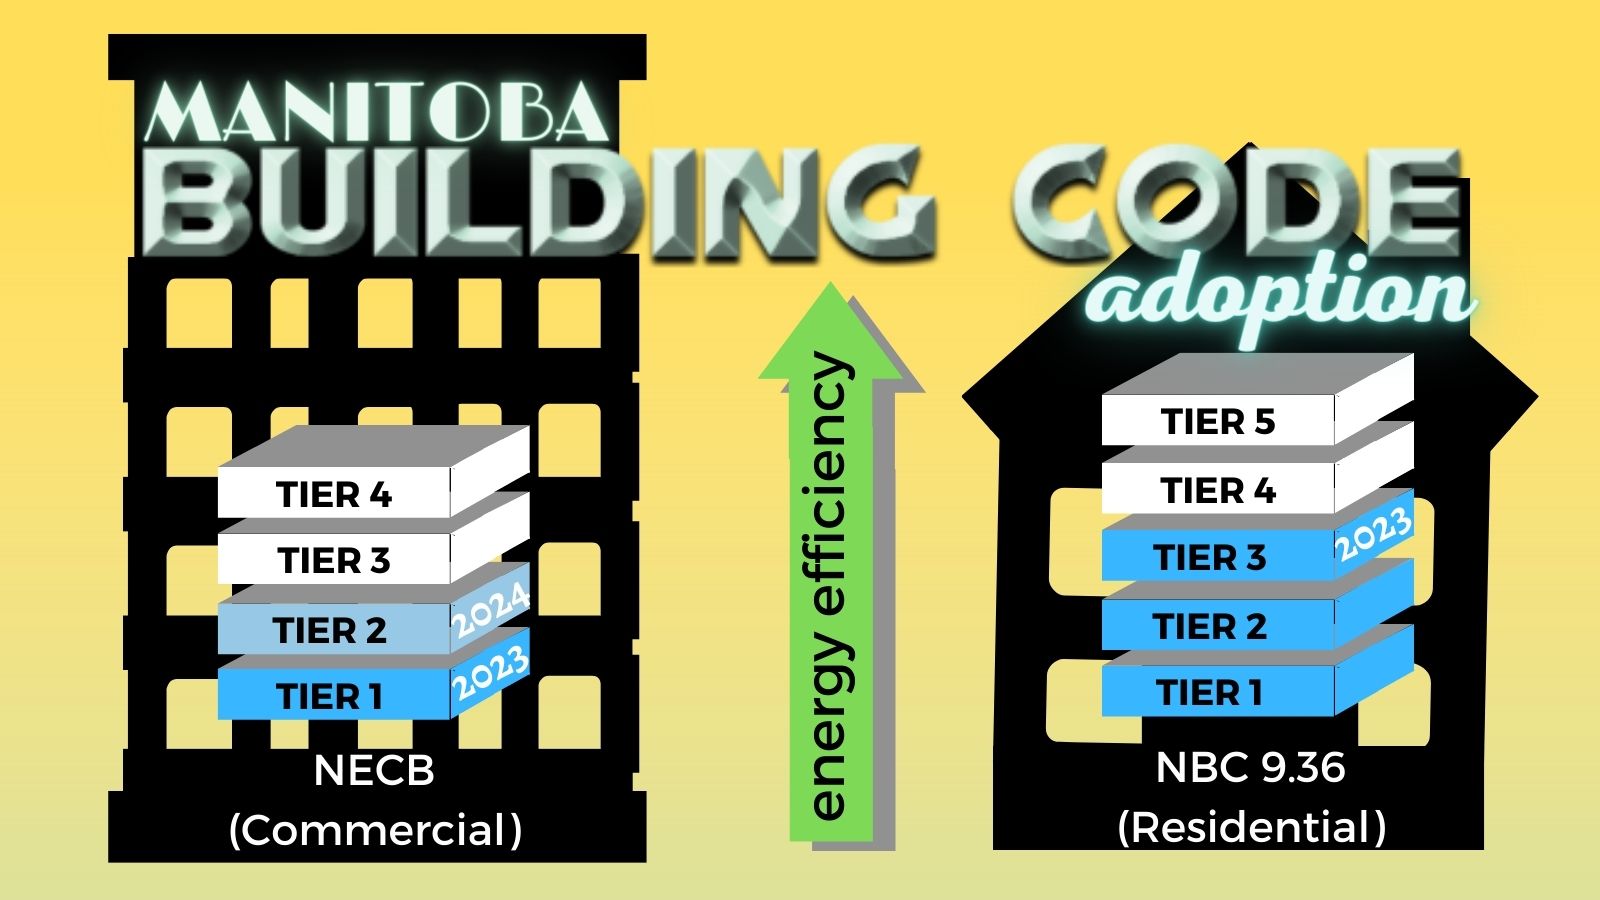 Manitoba Building Code adption showing that Tier 1 is adopted in 2023 and Tier 2 in 2024 for commercial buildings and 3 Tiers for Resildiencial energy efficiency goes up the higher the Tier